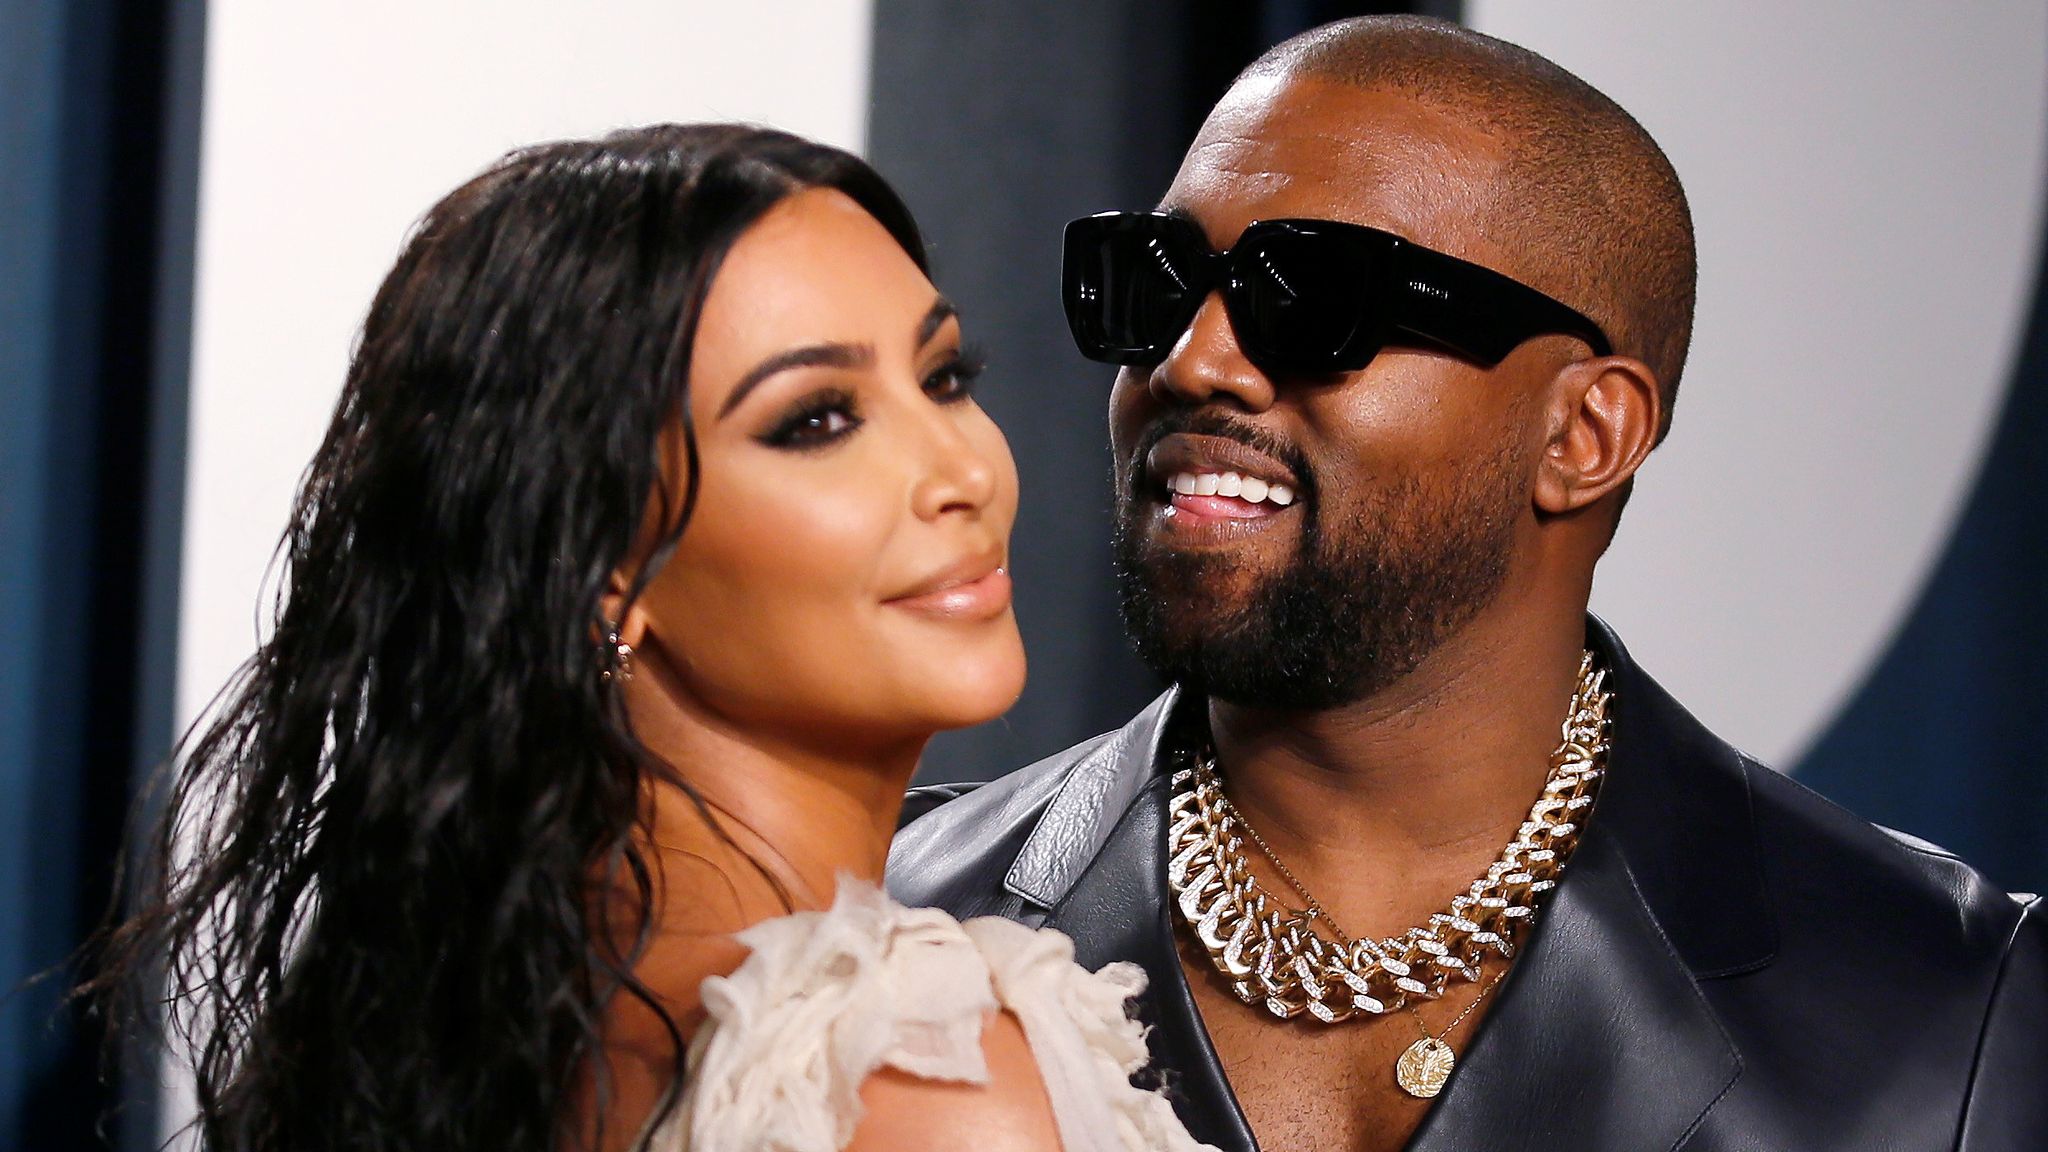 Kim Kardashian And Kanye West Reunite For A Family Dinner Date